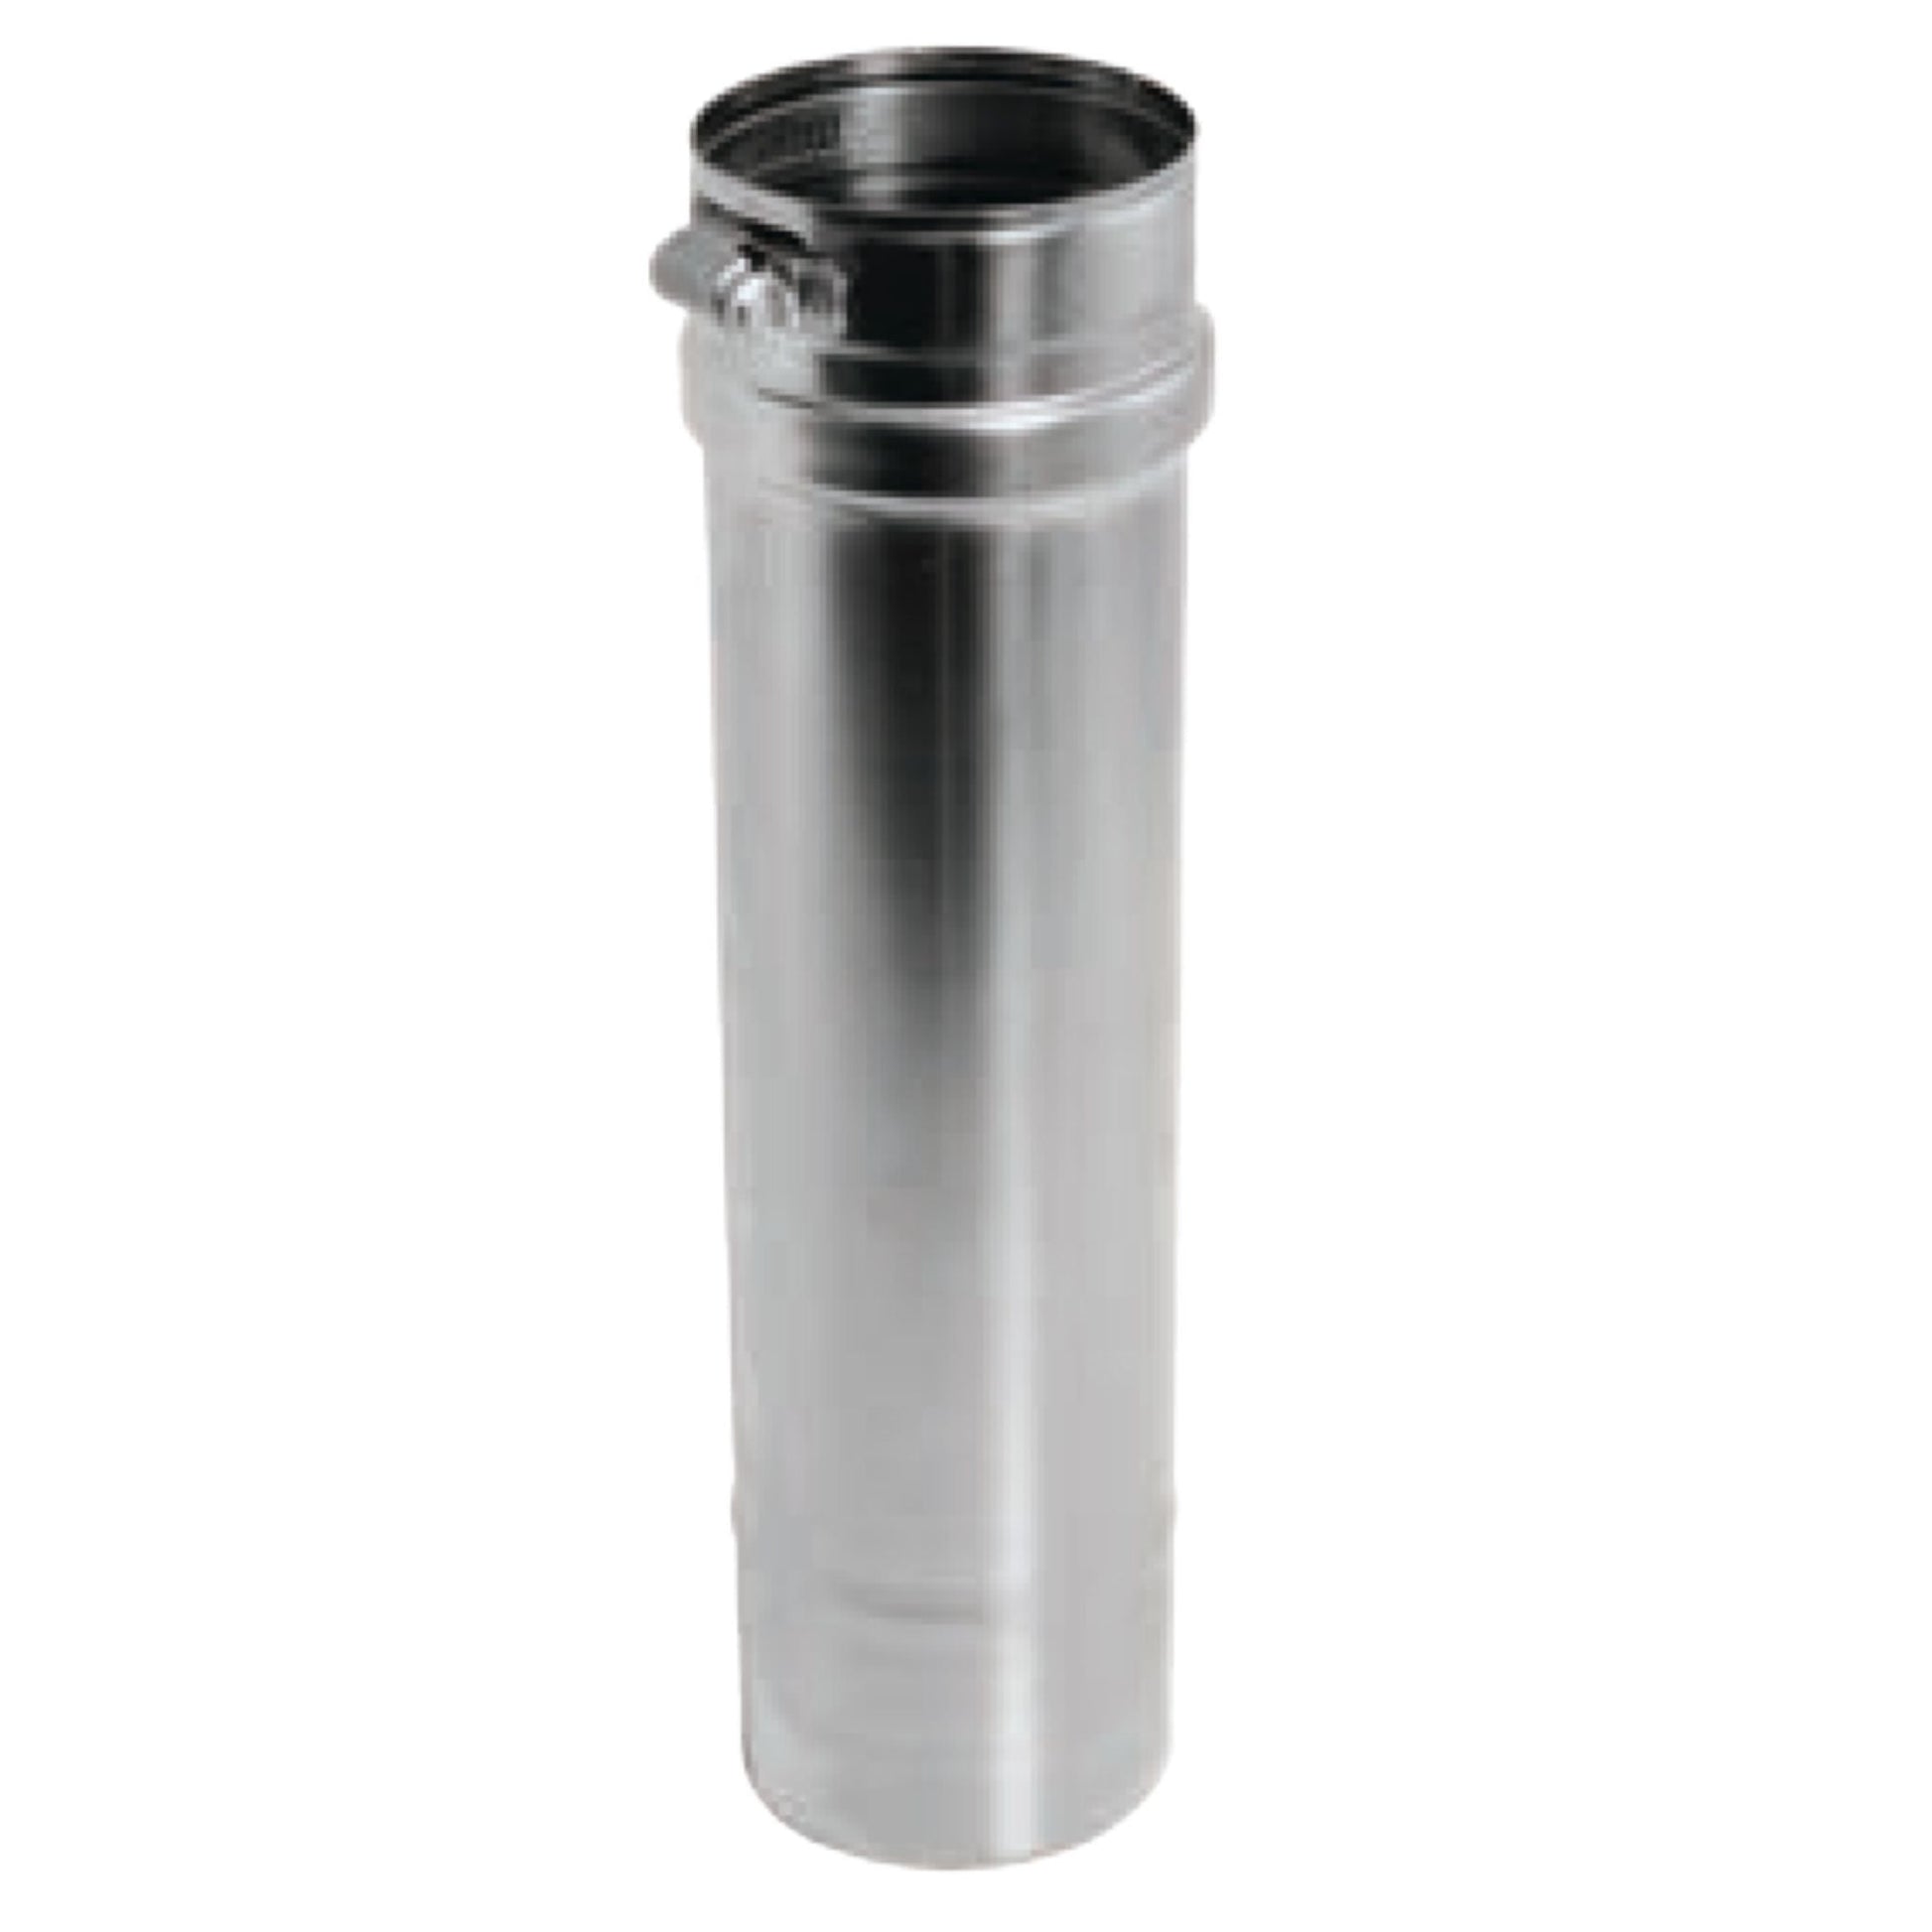 DuraVent FasNSeal 6" x 18" 29-4C Stainless Steel Vent Length